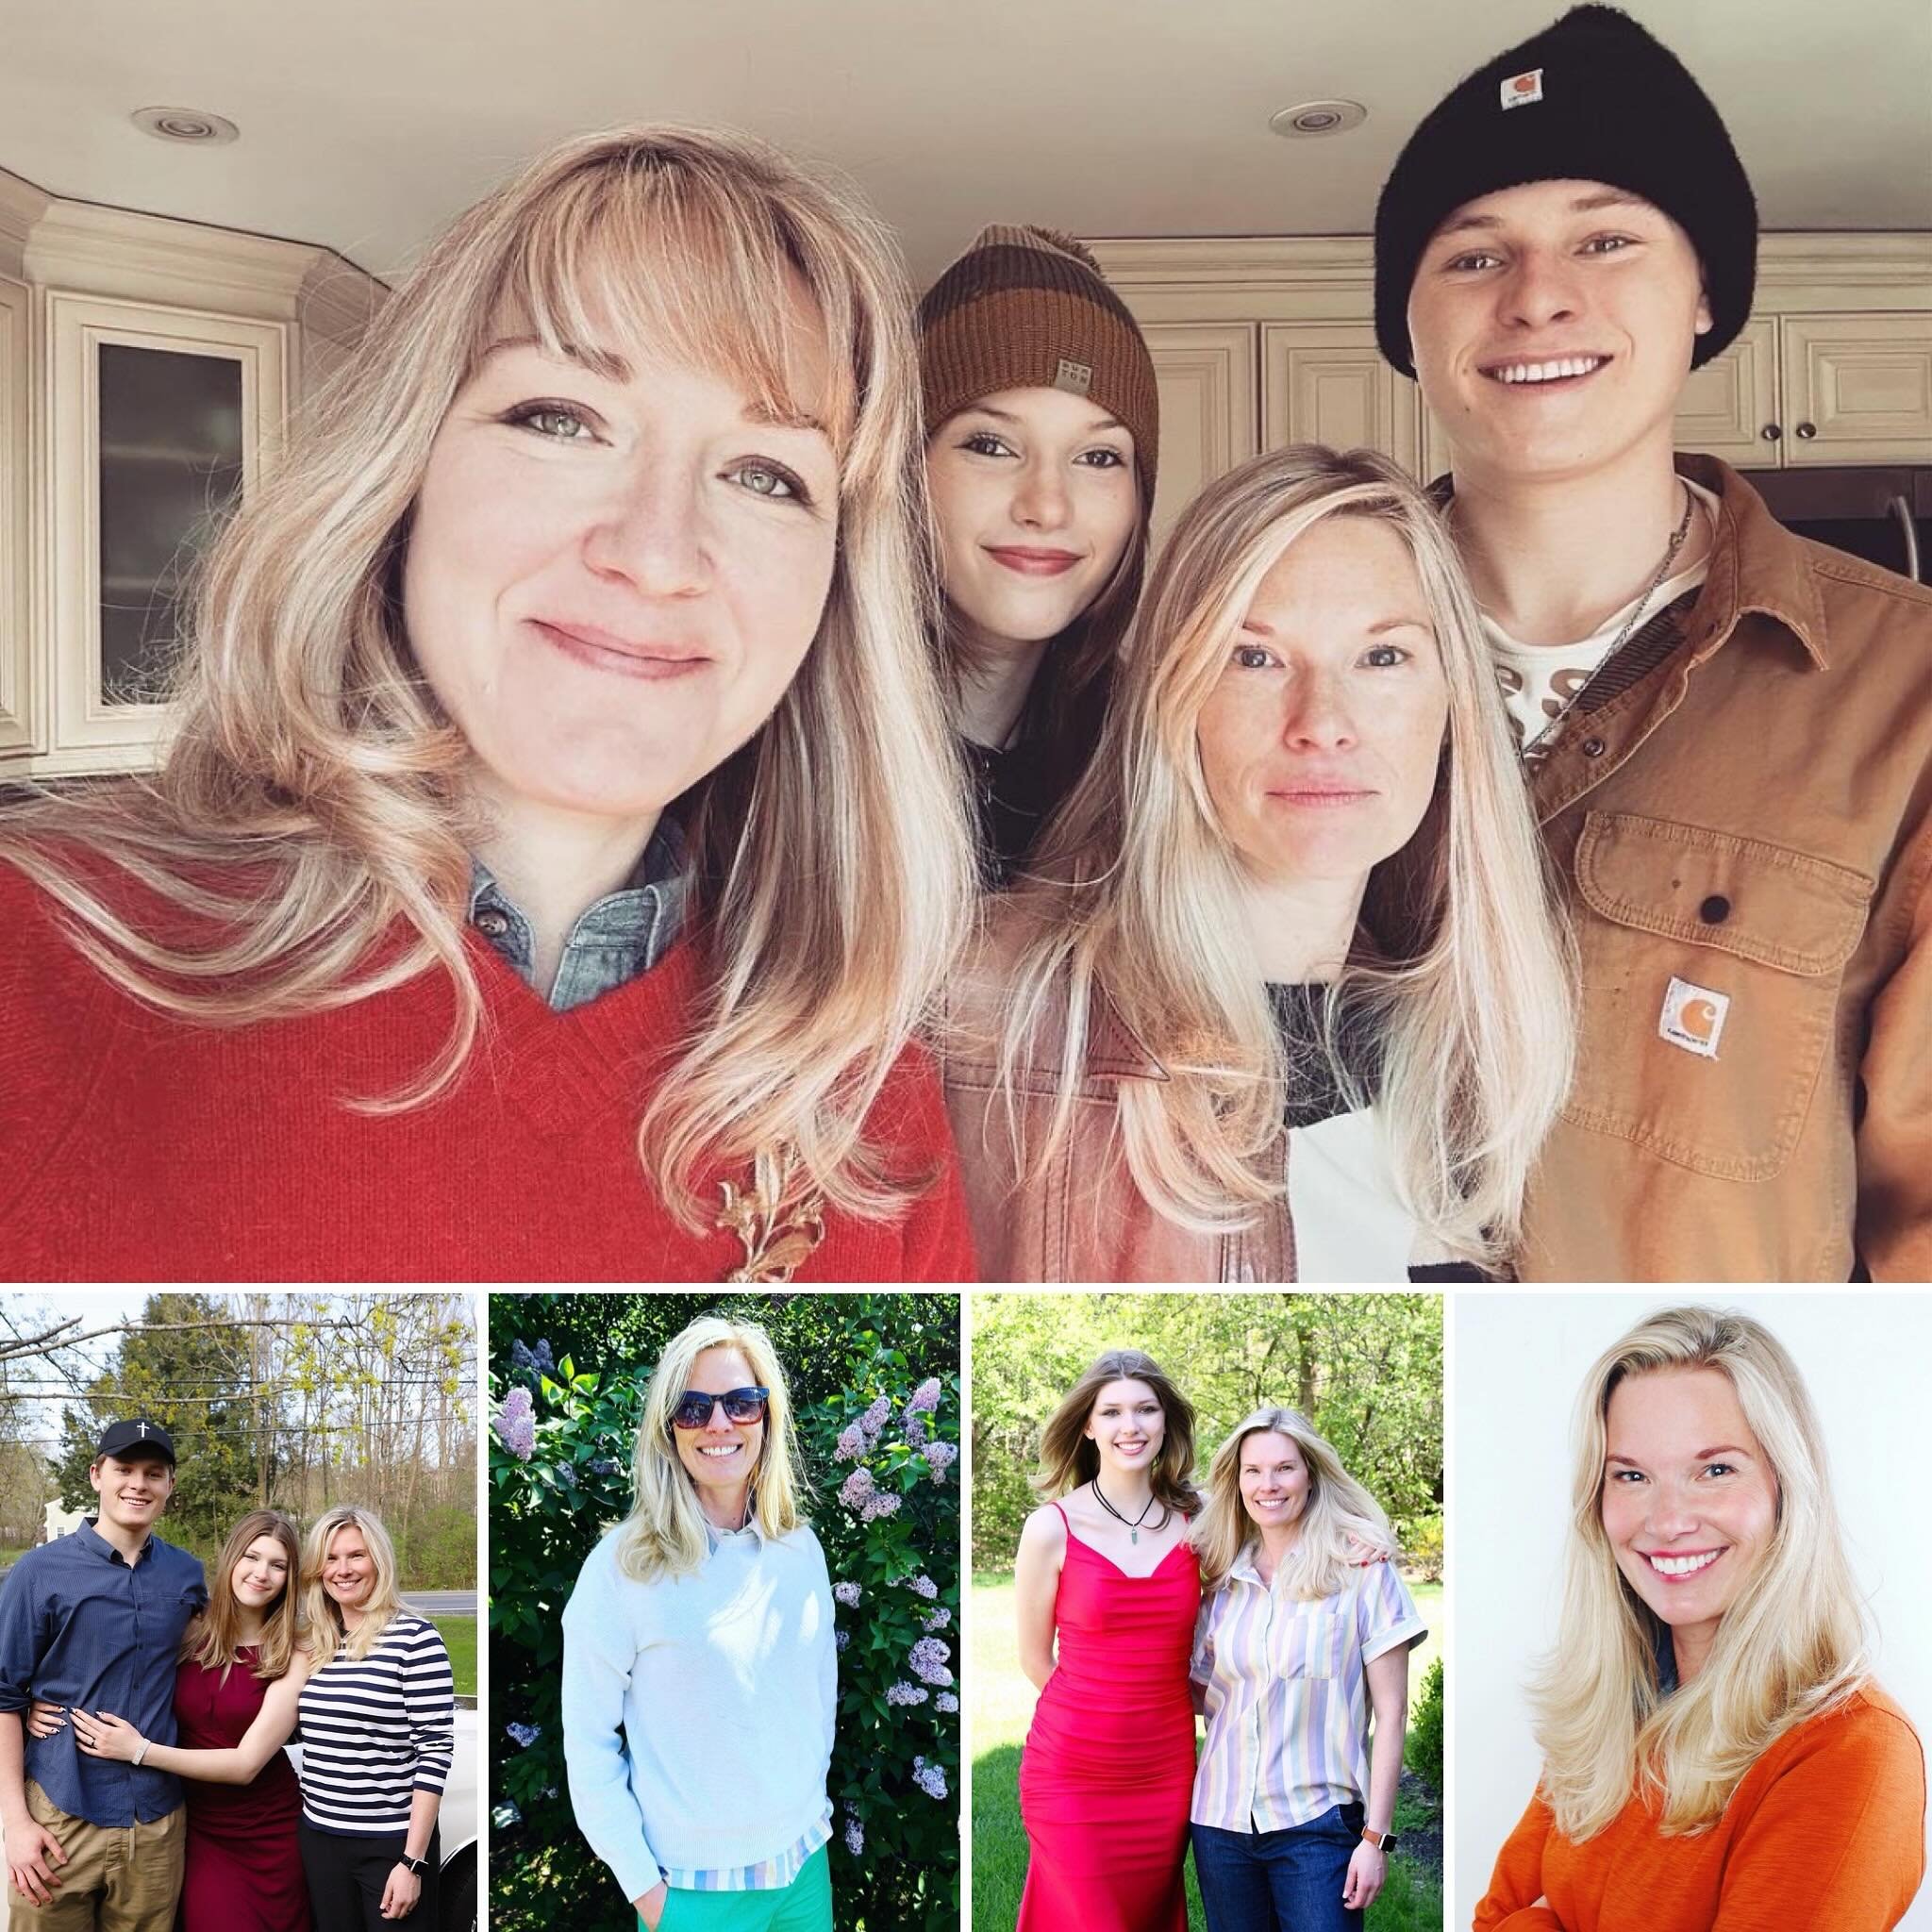 Happy Mother&rsquo;s Day to all the hardworking women who show up for their families every day. And to my wife, who shows up selflessly for our kids and believes in their potential: you are the strength and grace that make this family thrive. We love